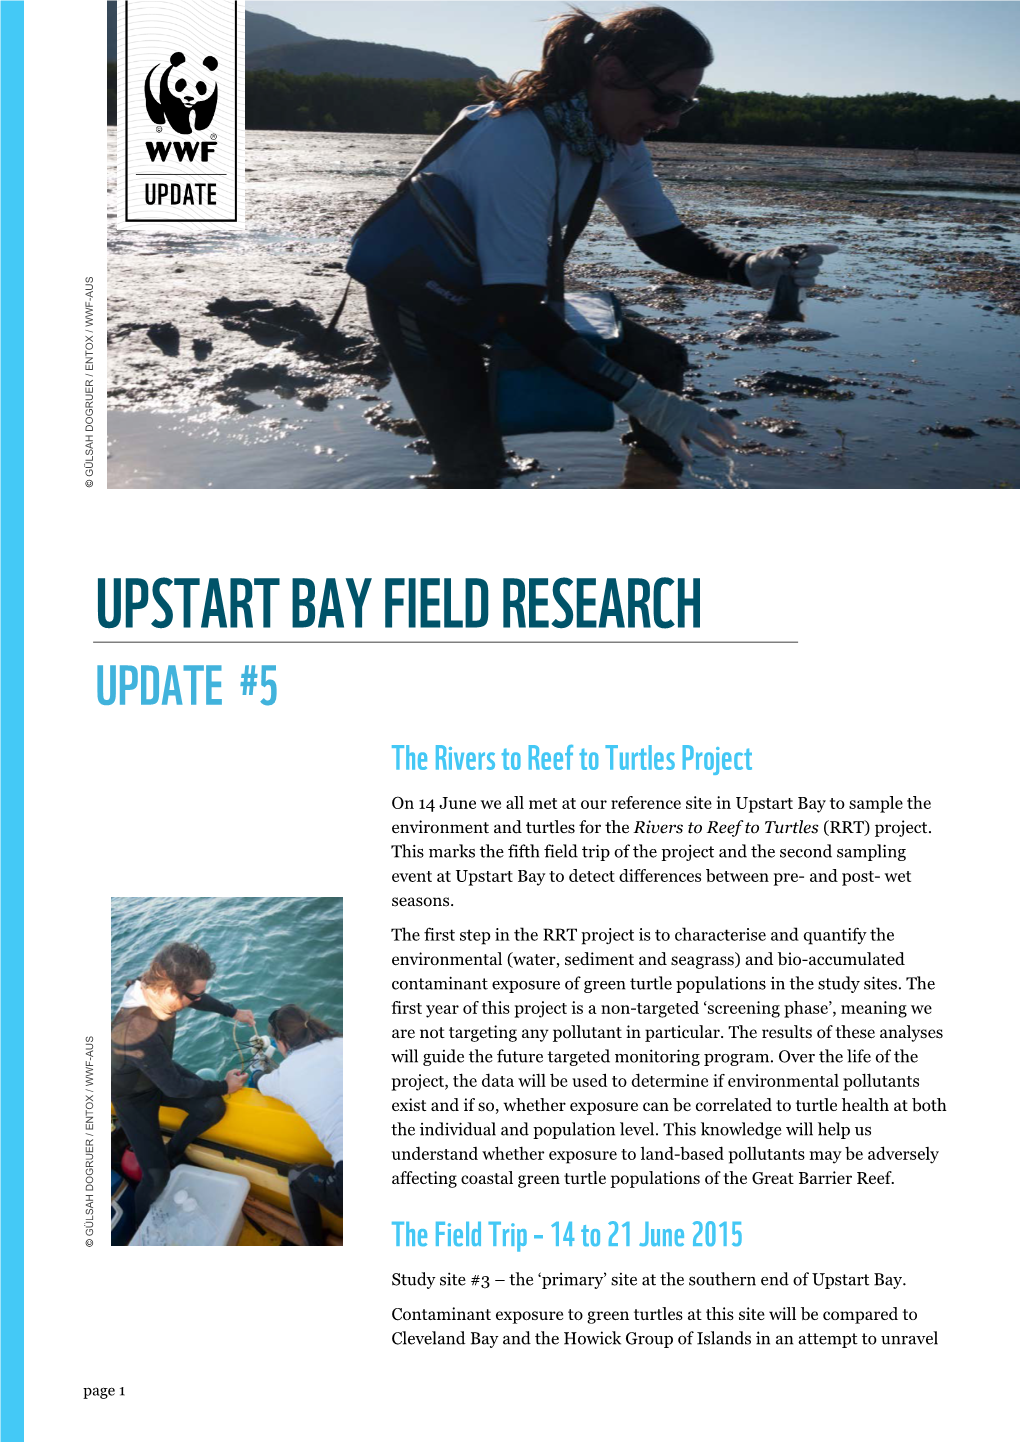 UPSTART BAY FIELD RESEARCH UPDATE #5 the Rivers to Reef to Turtles Project